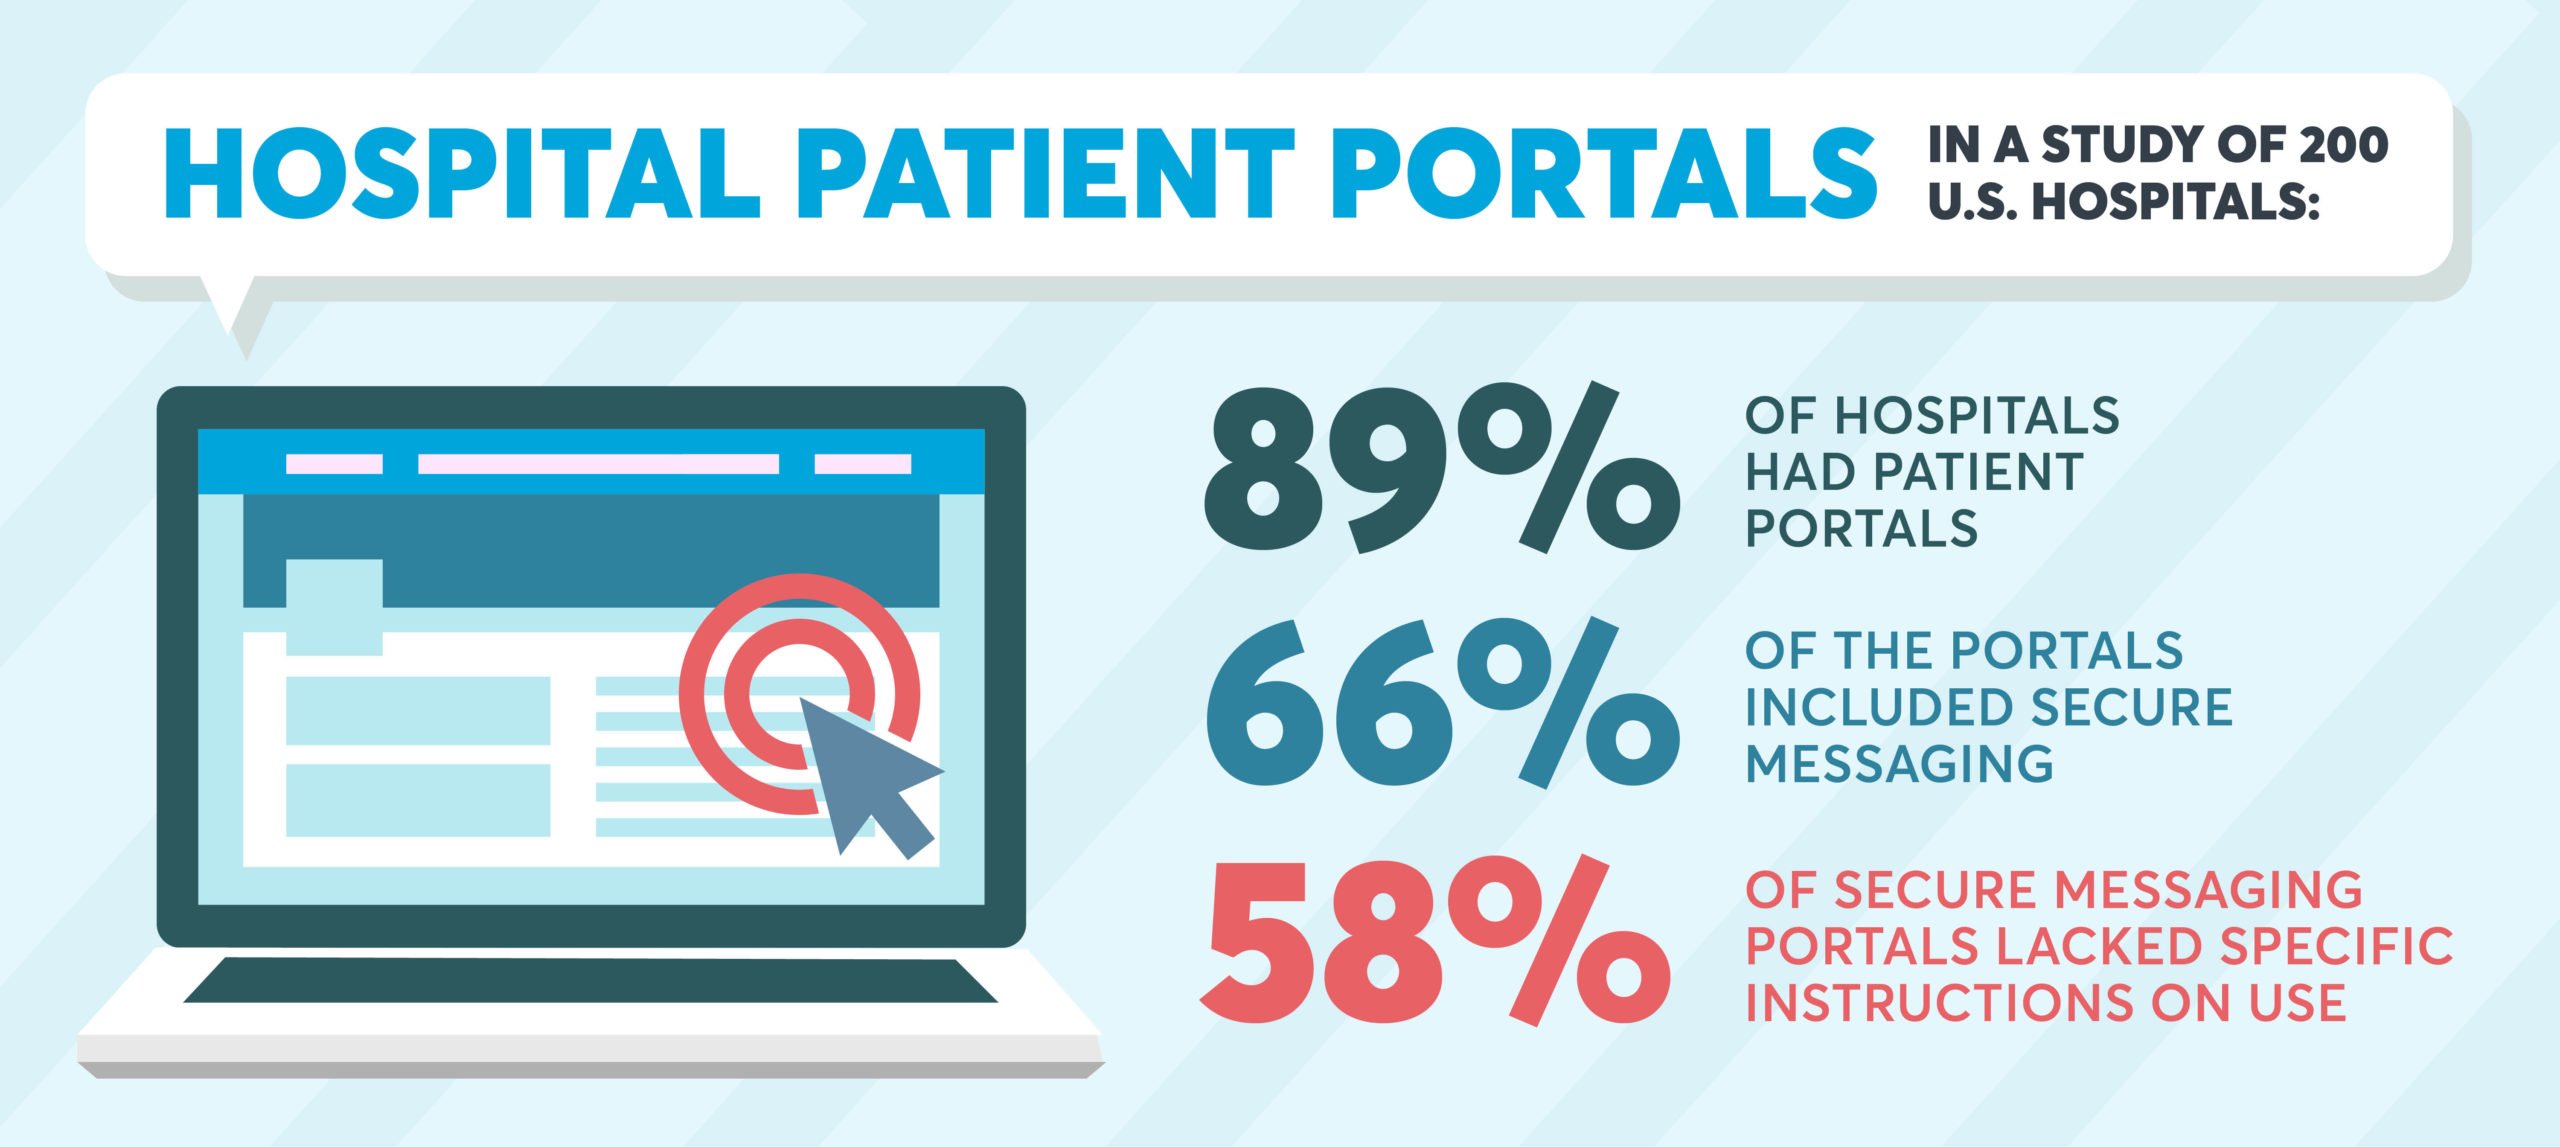 infographic about hospital patient portal guidance